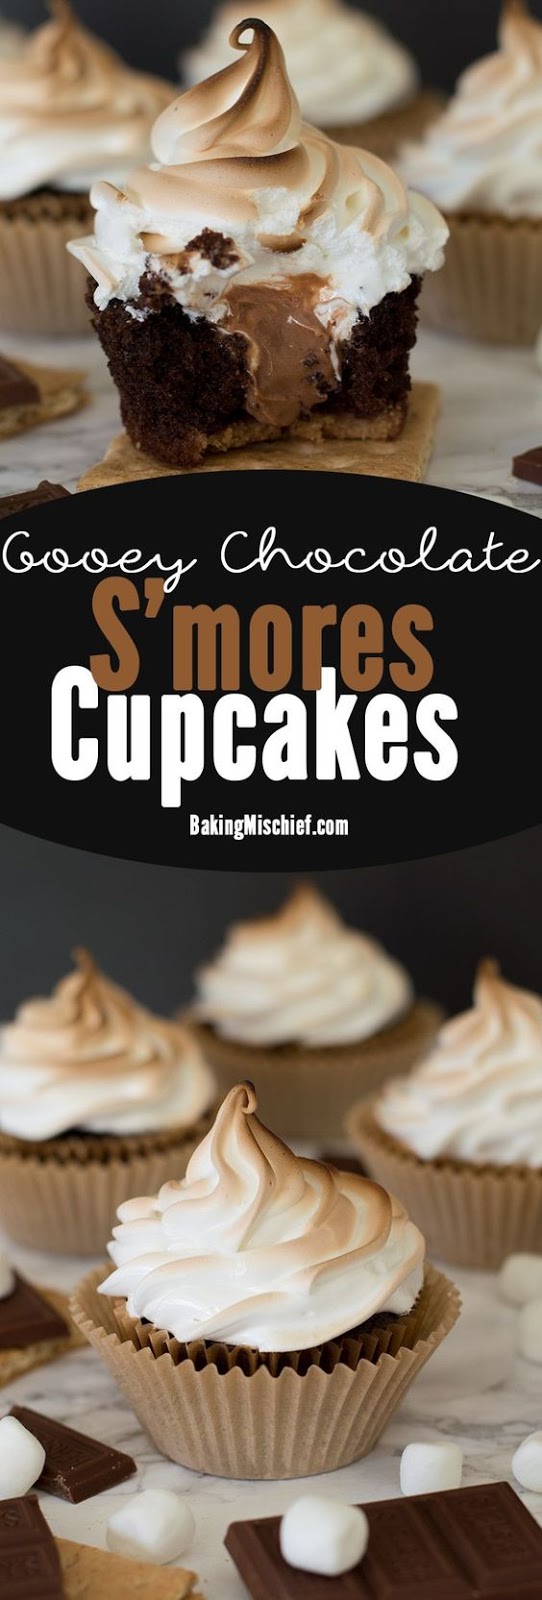 Gooey Chocolate S’mores Cupcakes Recipes – Home Inspiration and DIY ...